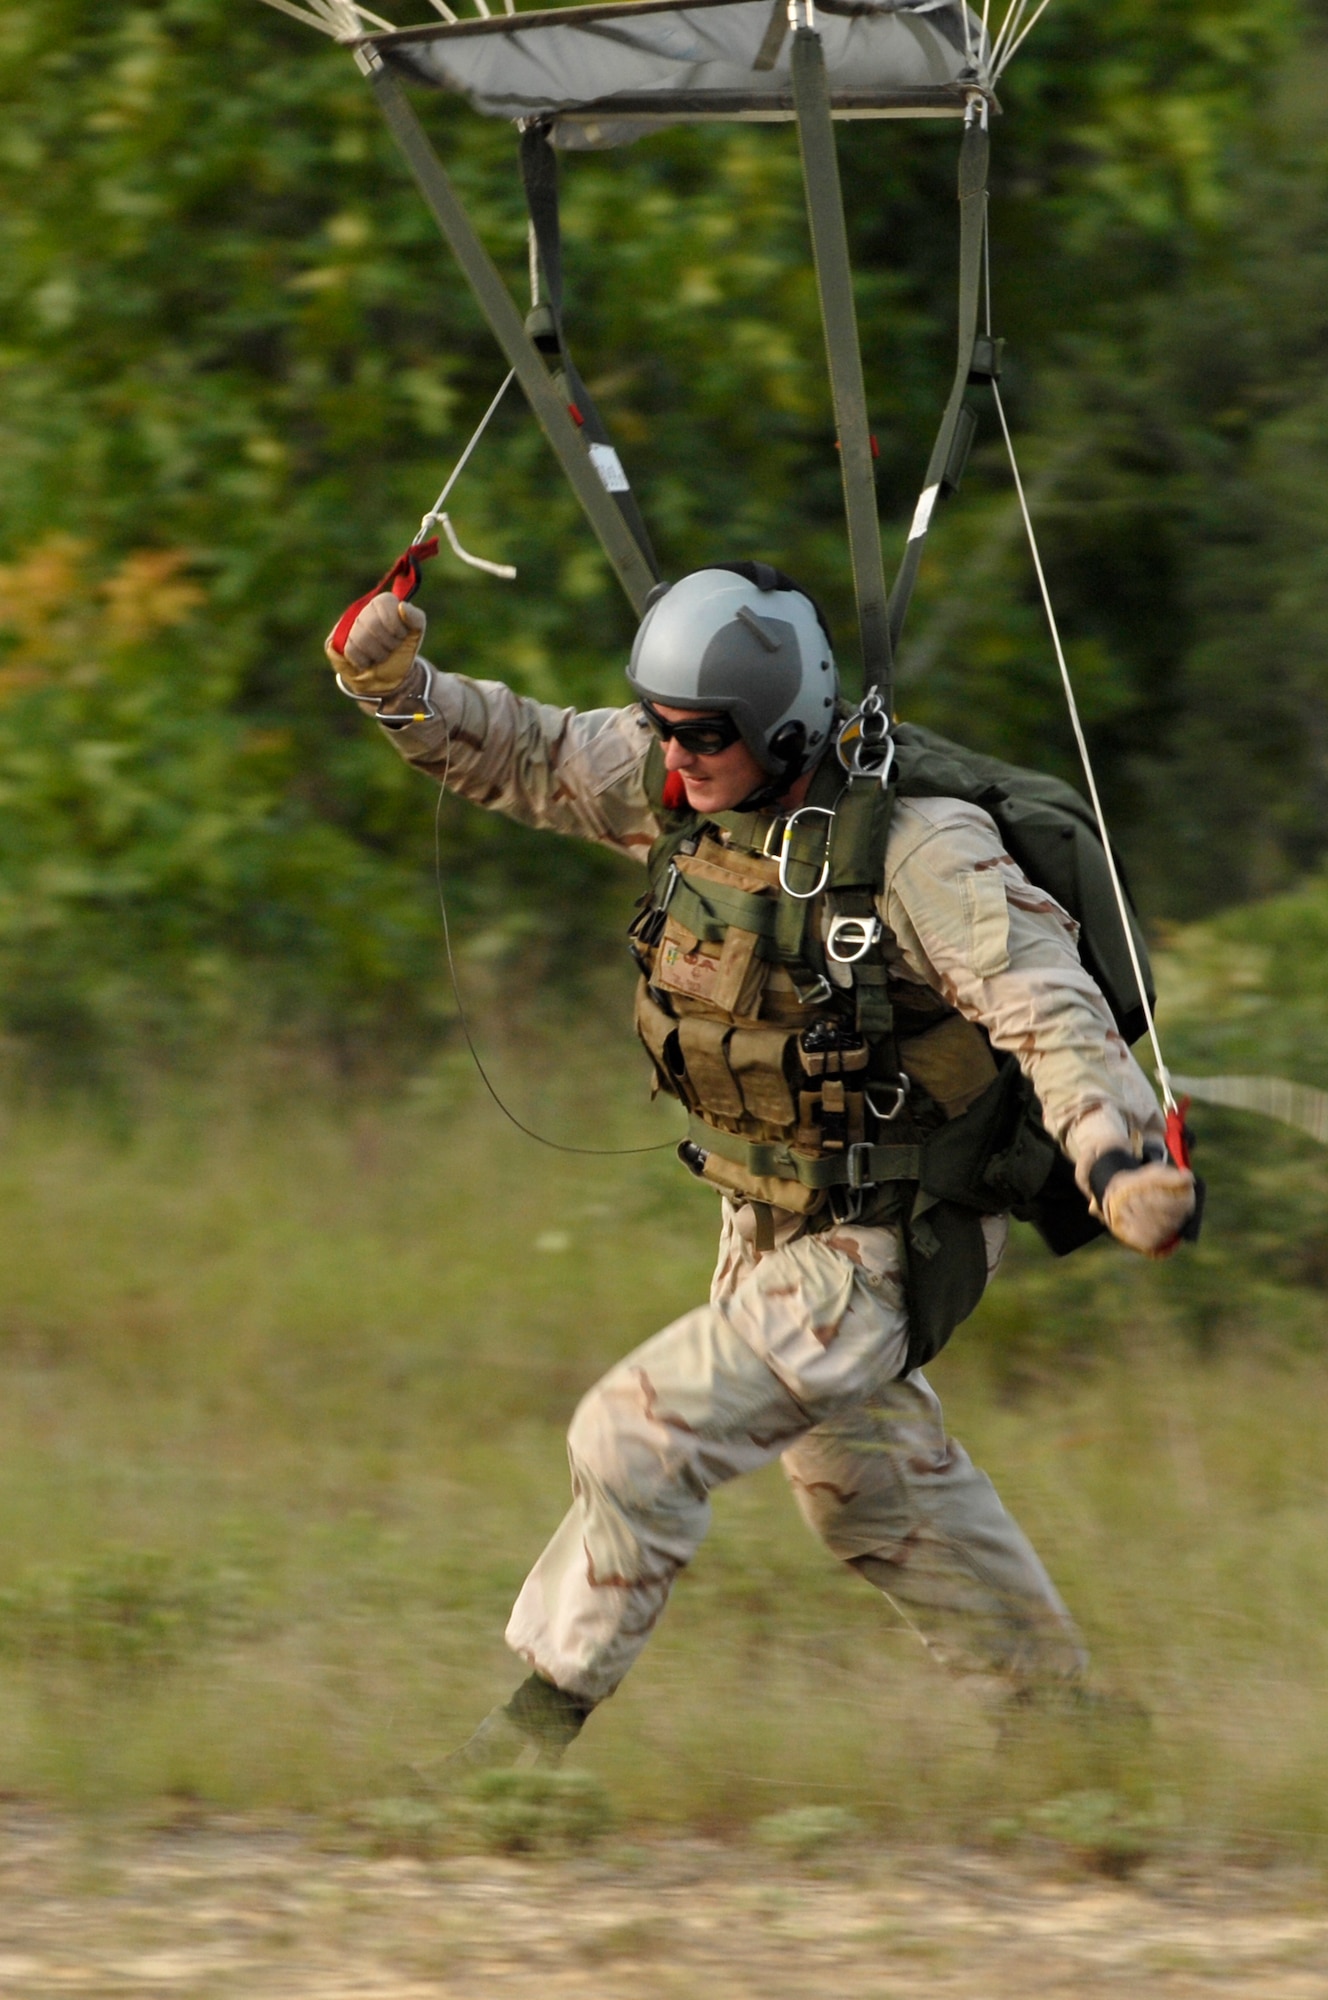 Staff Sgt. Timothy P. Davis during parachute readiness training. Sergeant Davis died of wounds suffered when his vehicle encountered an improvised explosive device in Afghanistan Feb. 20, 2009. He was assigned to the 23rd Special Tactics Squadron at Hurlburt Field, Fla. (U.S. Air Force photo)  
